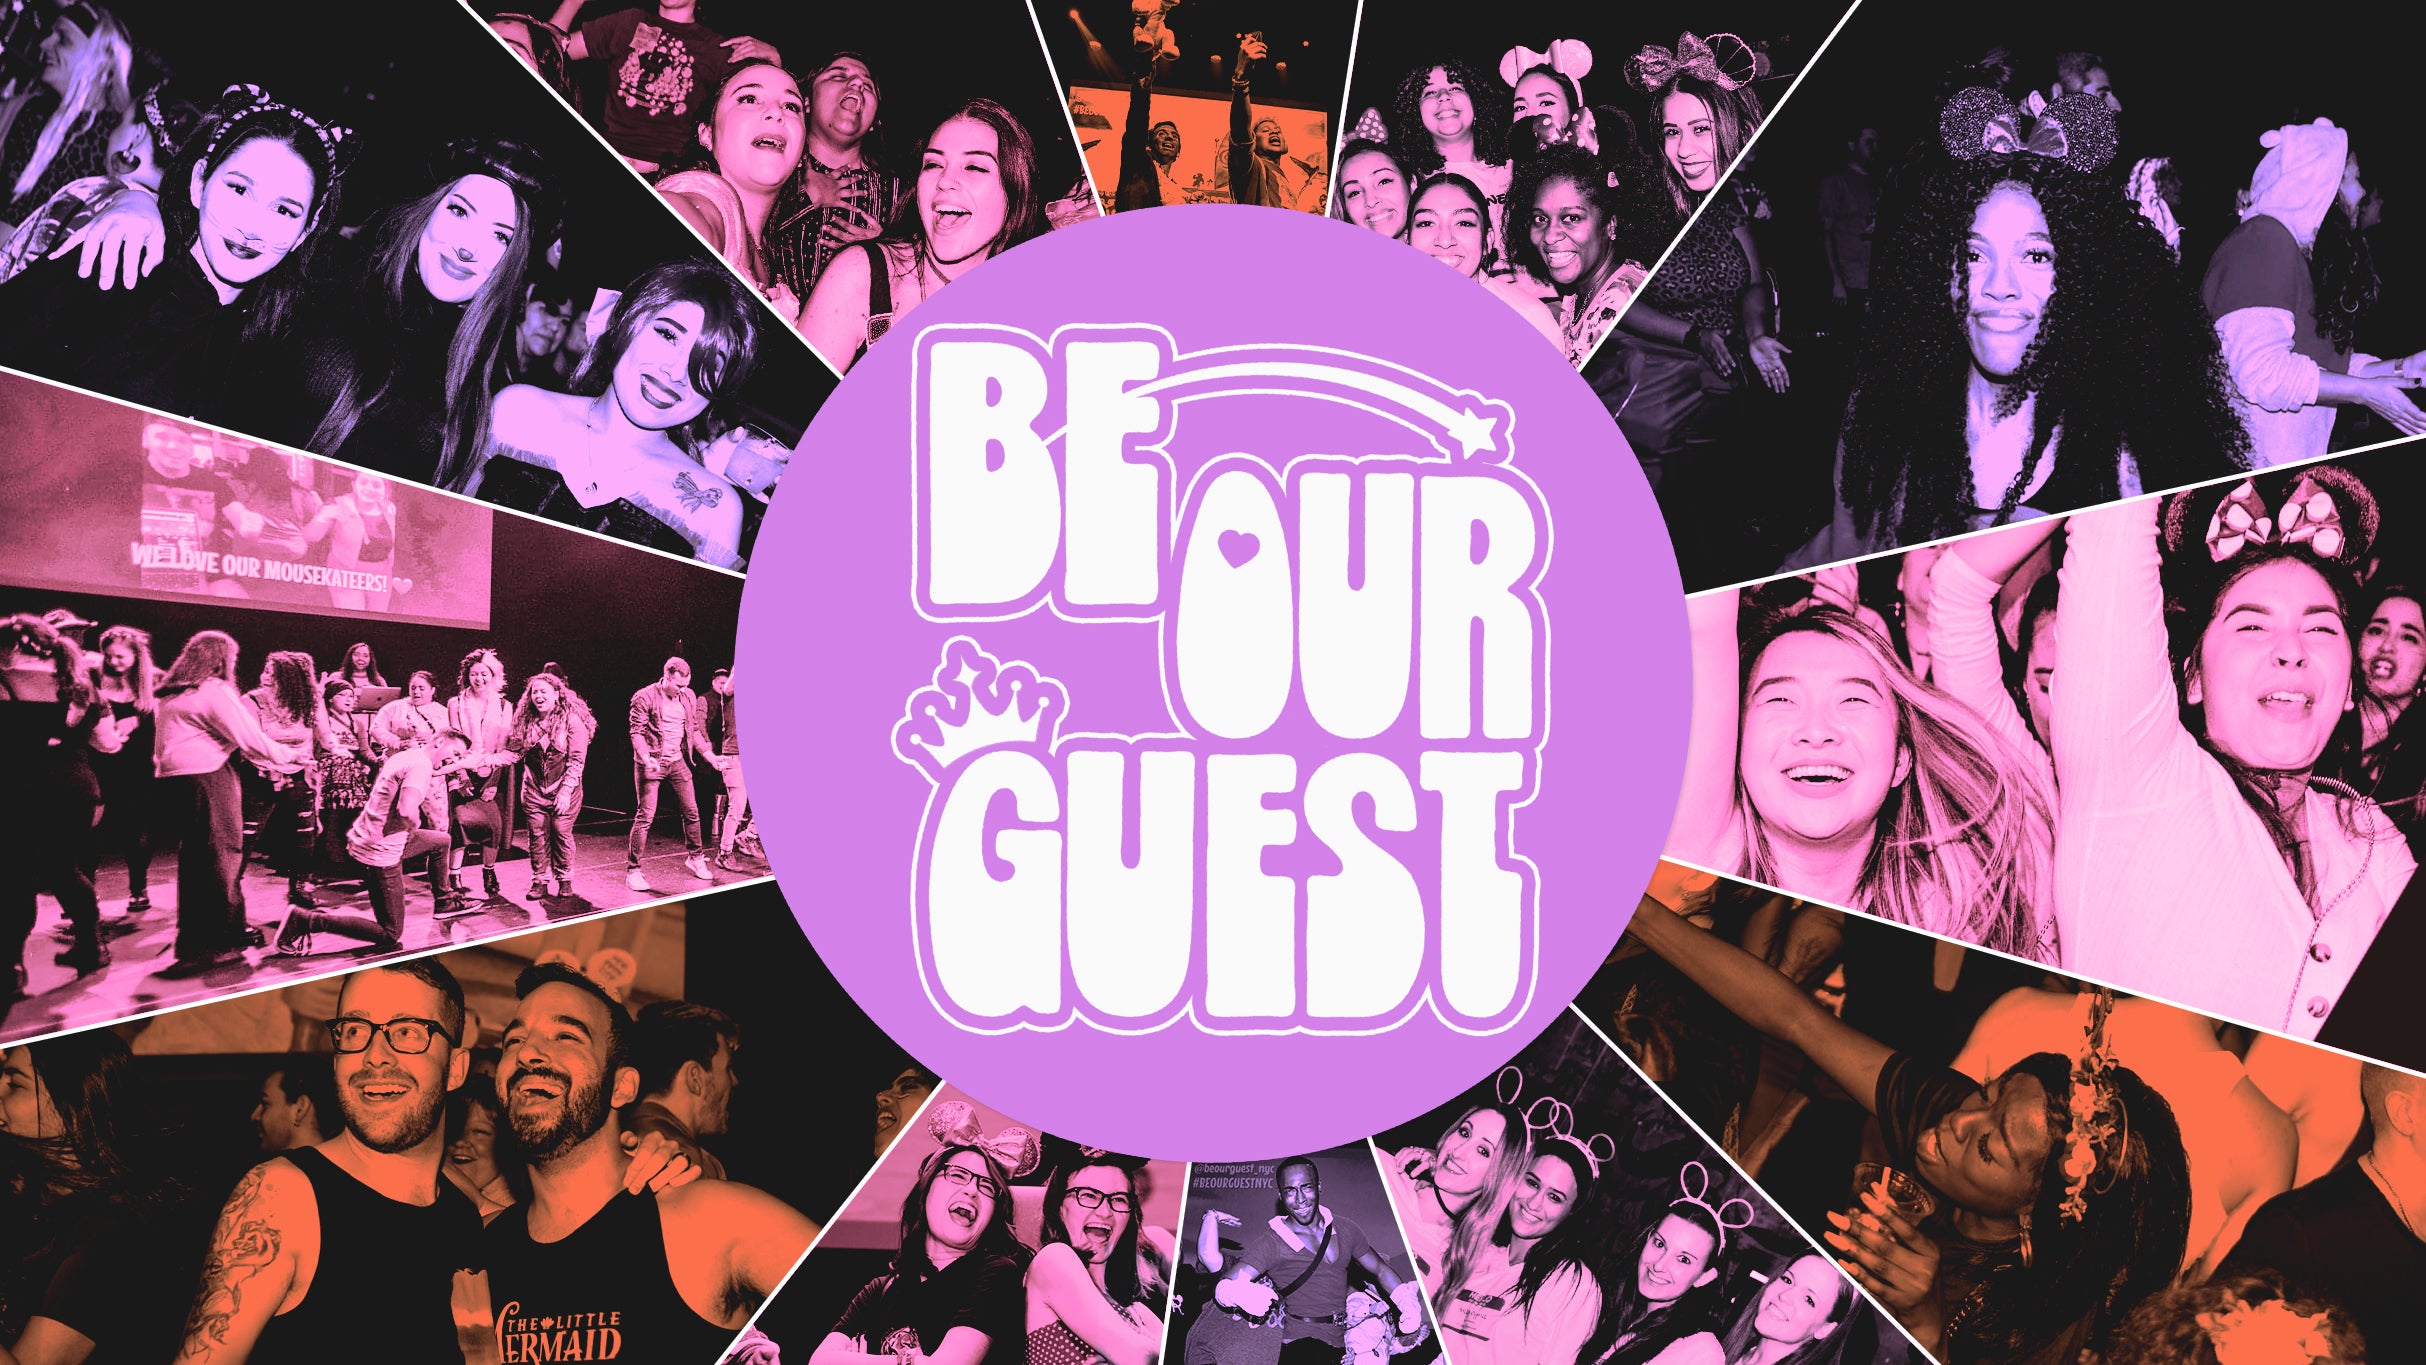 Be Our Guest - A Disney DJ Night - 18+ Event presale code for early tickets in Dallas